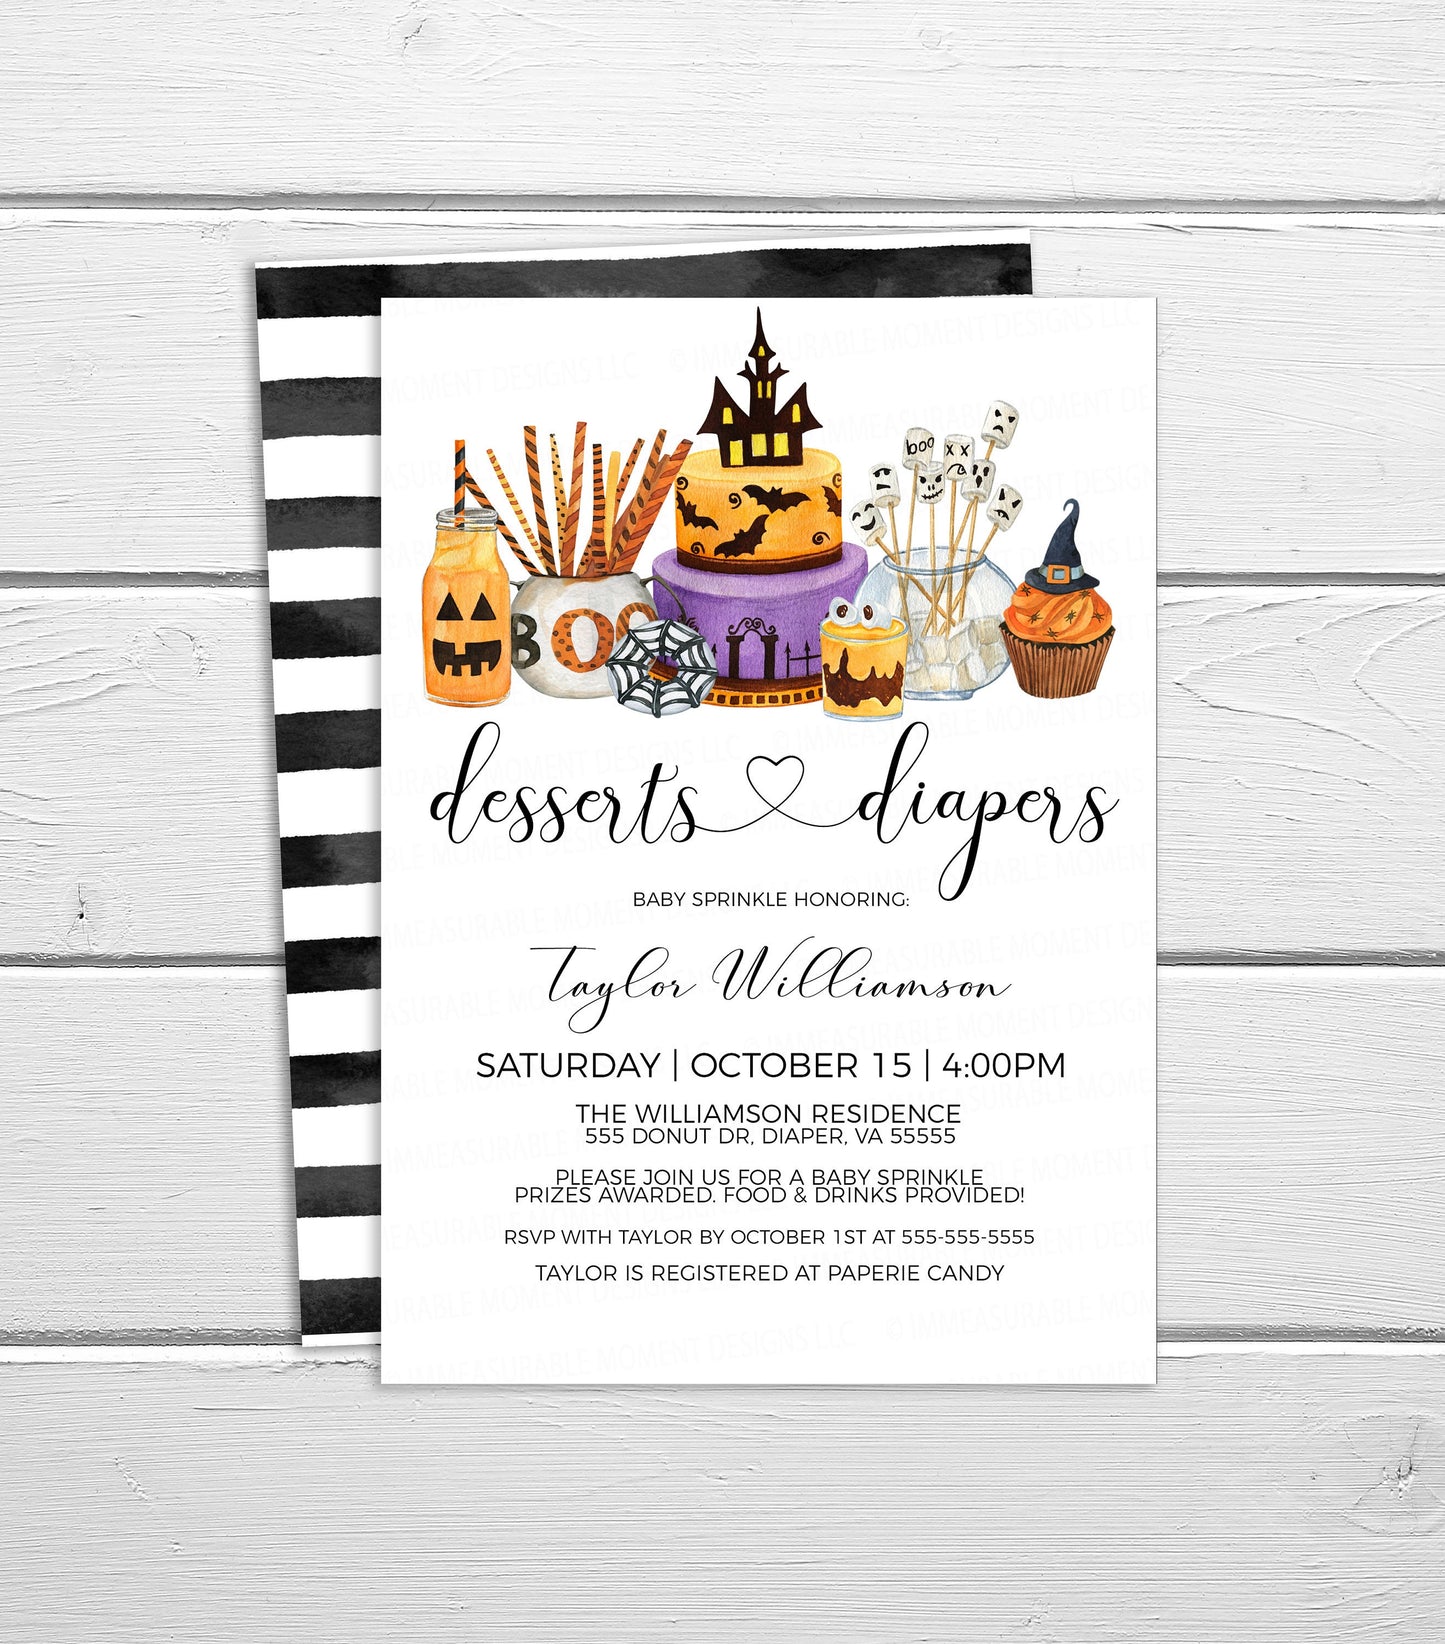 Halloween Baby Shower Invitation, Desserts And Diapers Invite, Donuts Baby Sprinkle, Boy Girl Twins Sprinkled With Love, Editable Printable